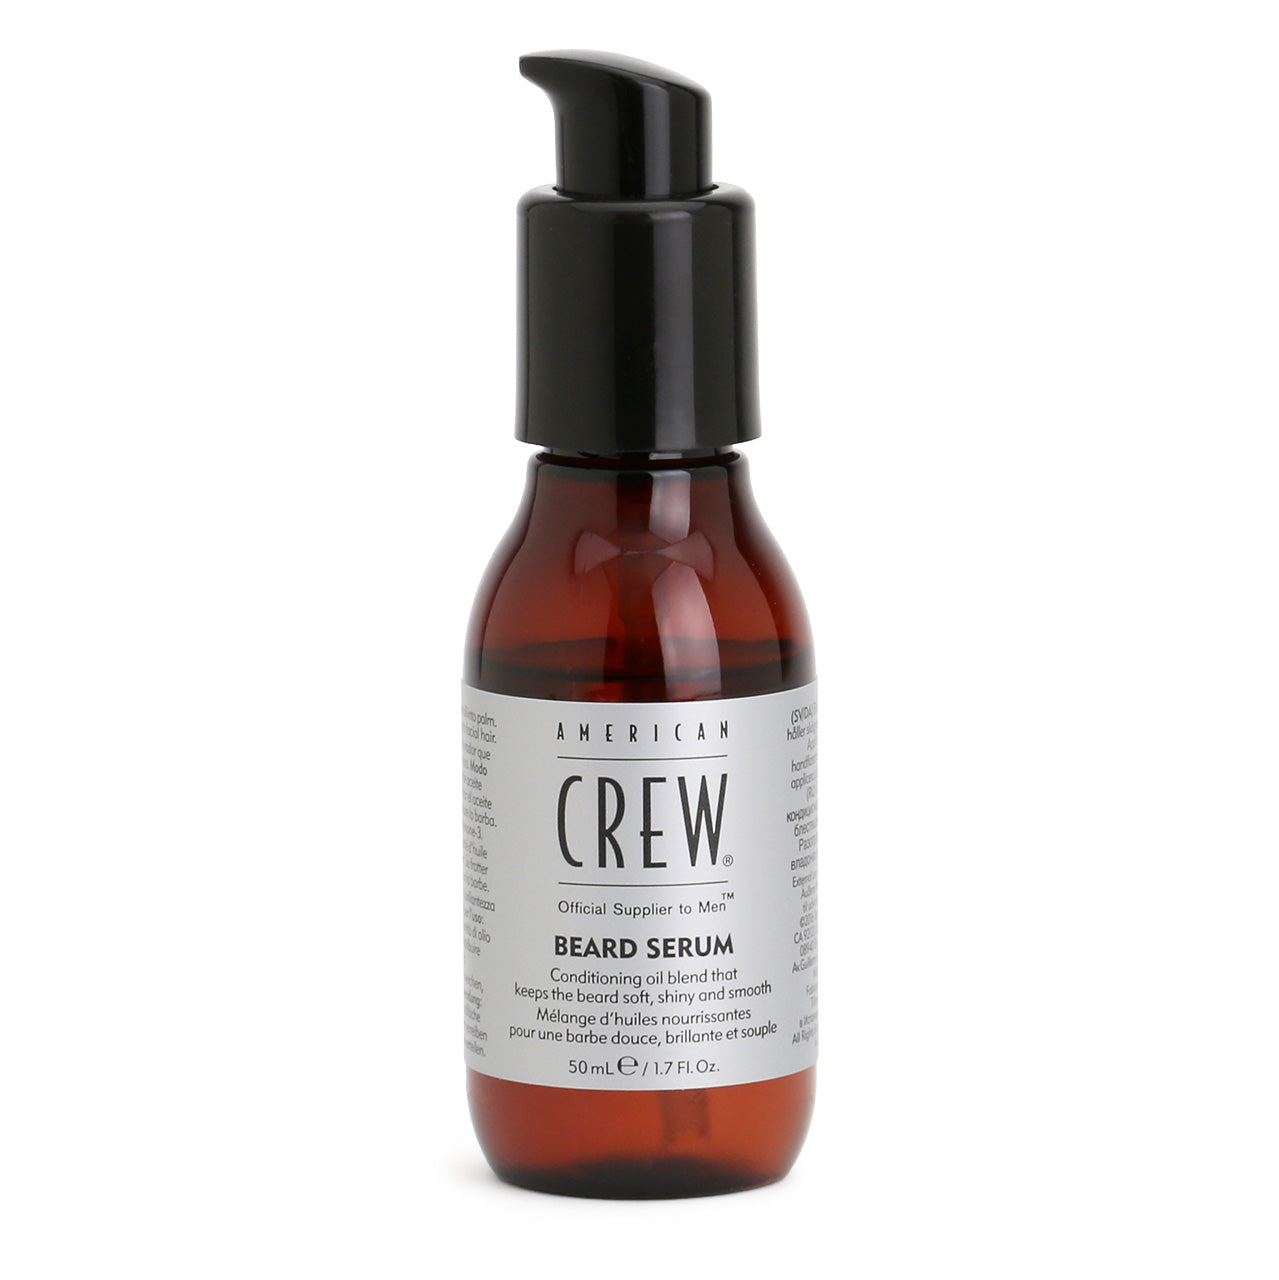 American Crew Beard Serum amber bottle with silcer and black label and a black serum pump cap